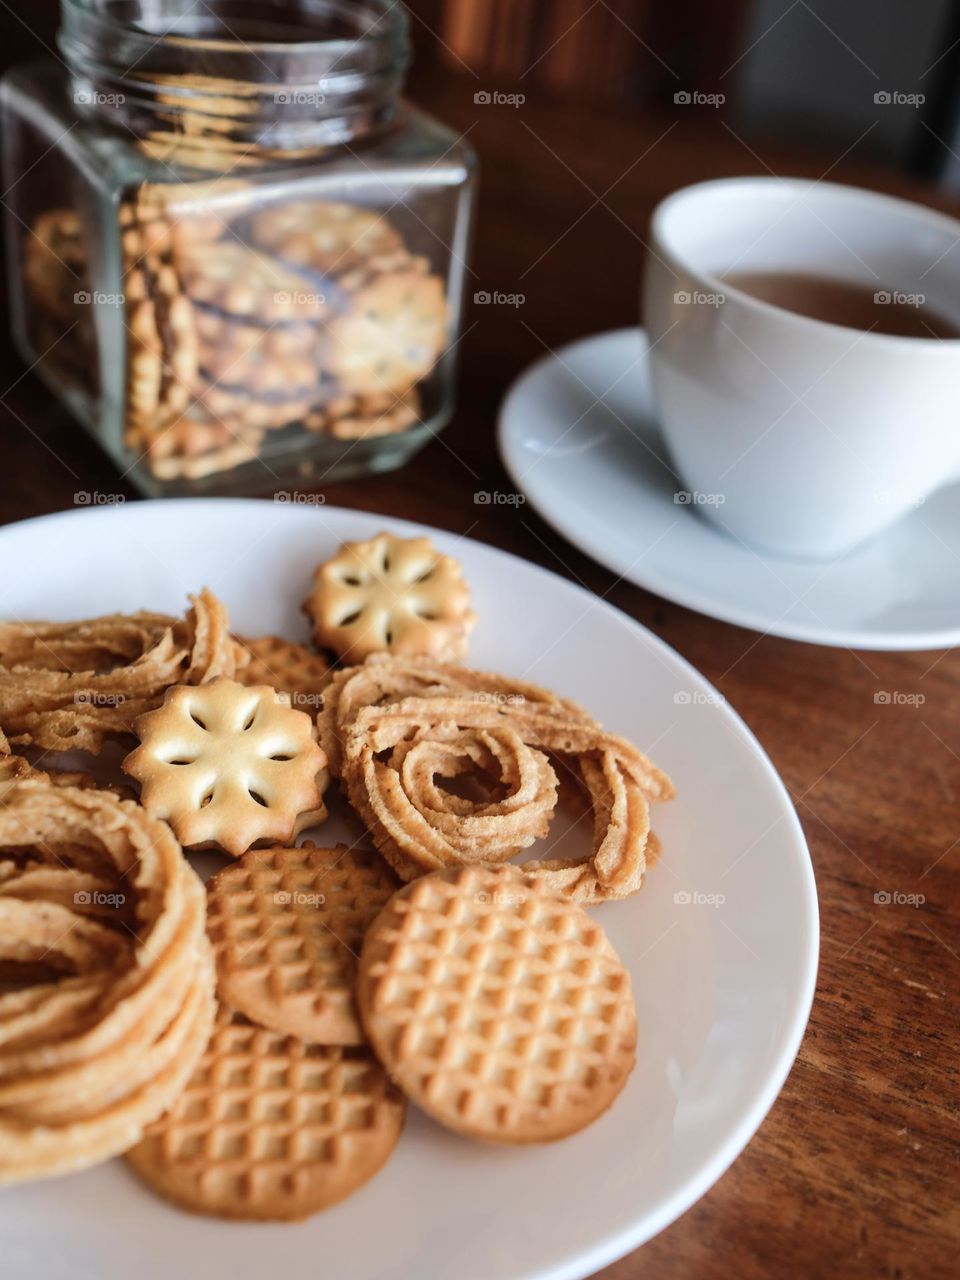 Hot tea and cookies are a perfect combo for evening tea